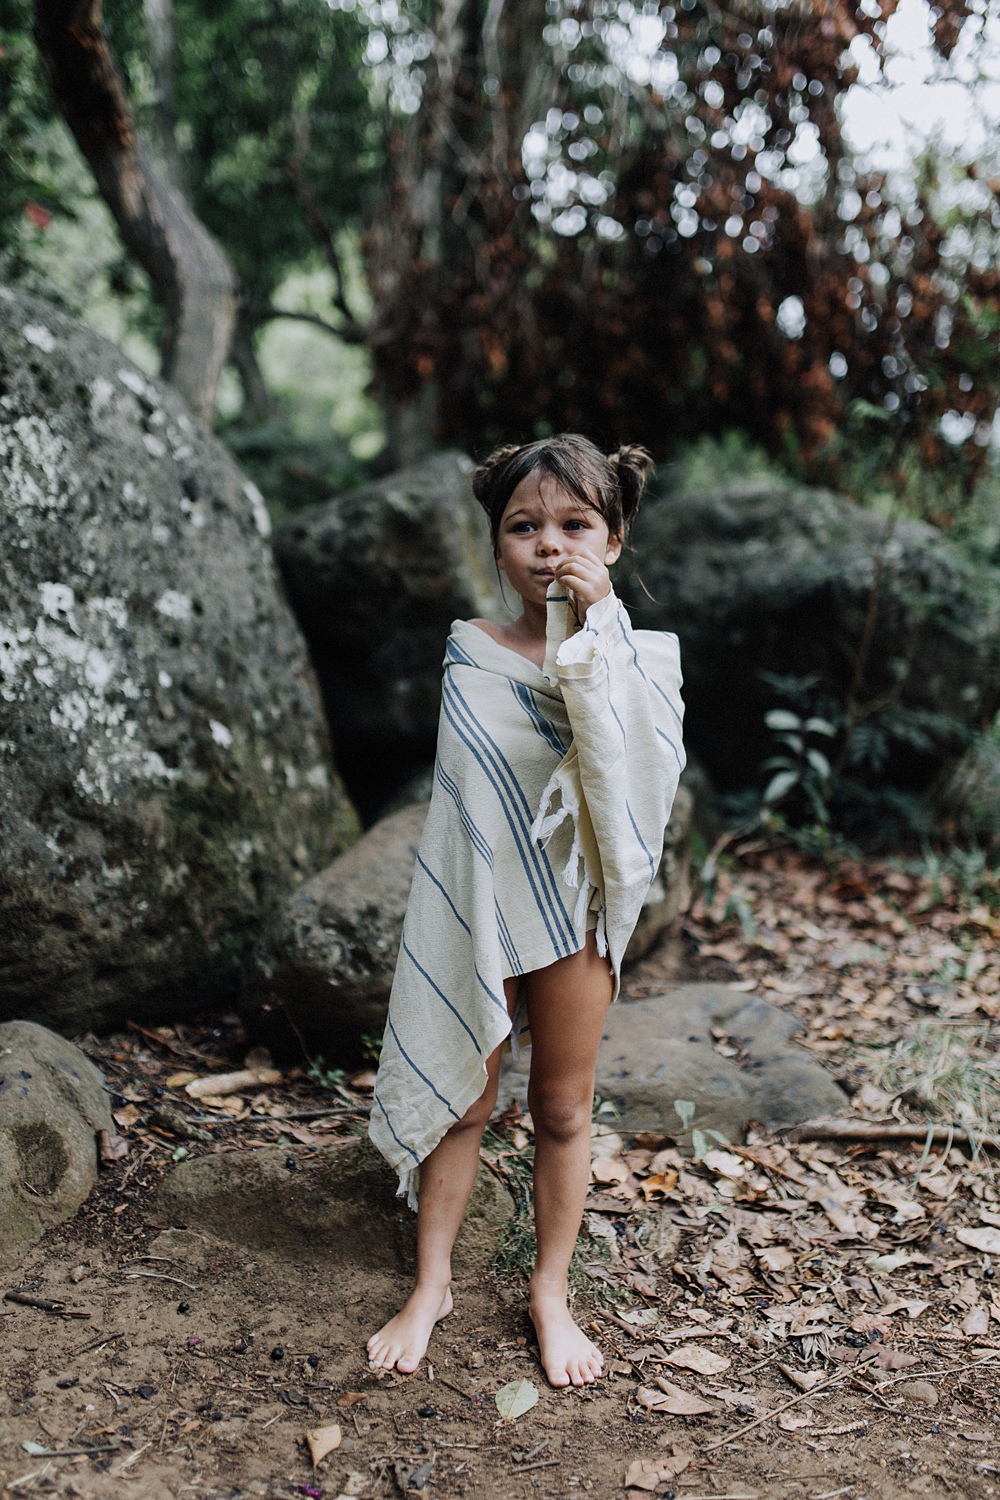 maui photographer visits iao valley in maui, hawaii for family photography. 